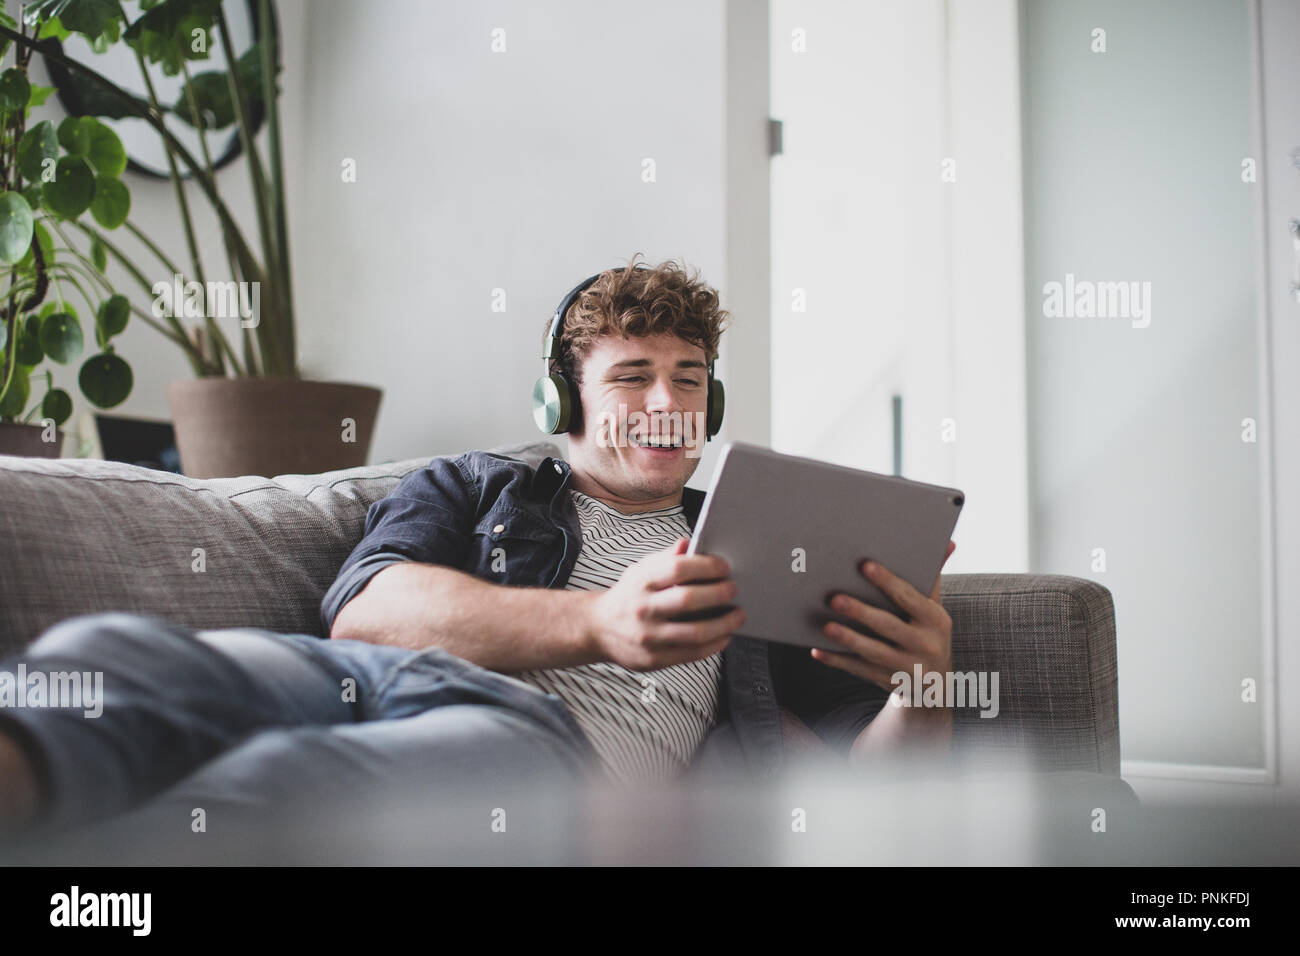 Young adult male watching video on digital tablet Stock Photo